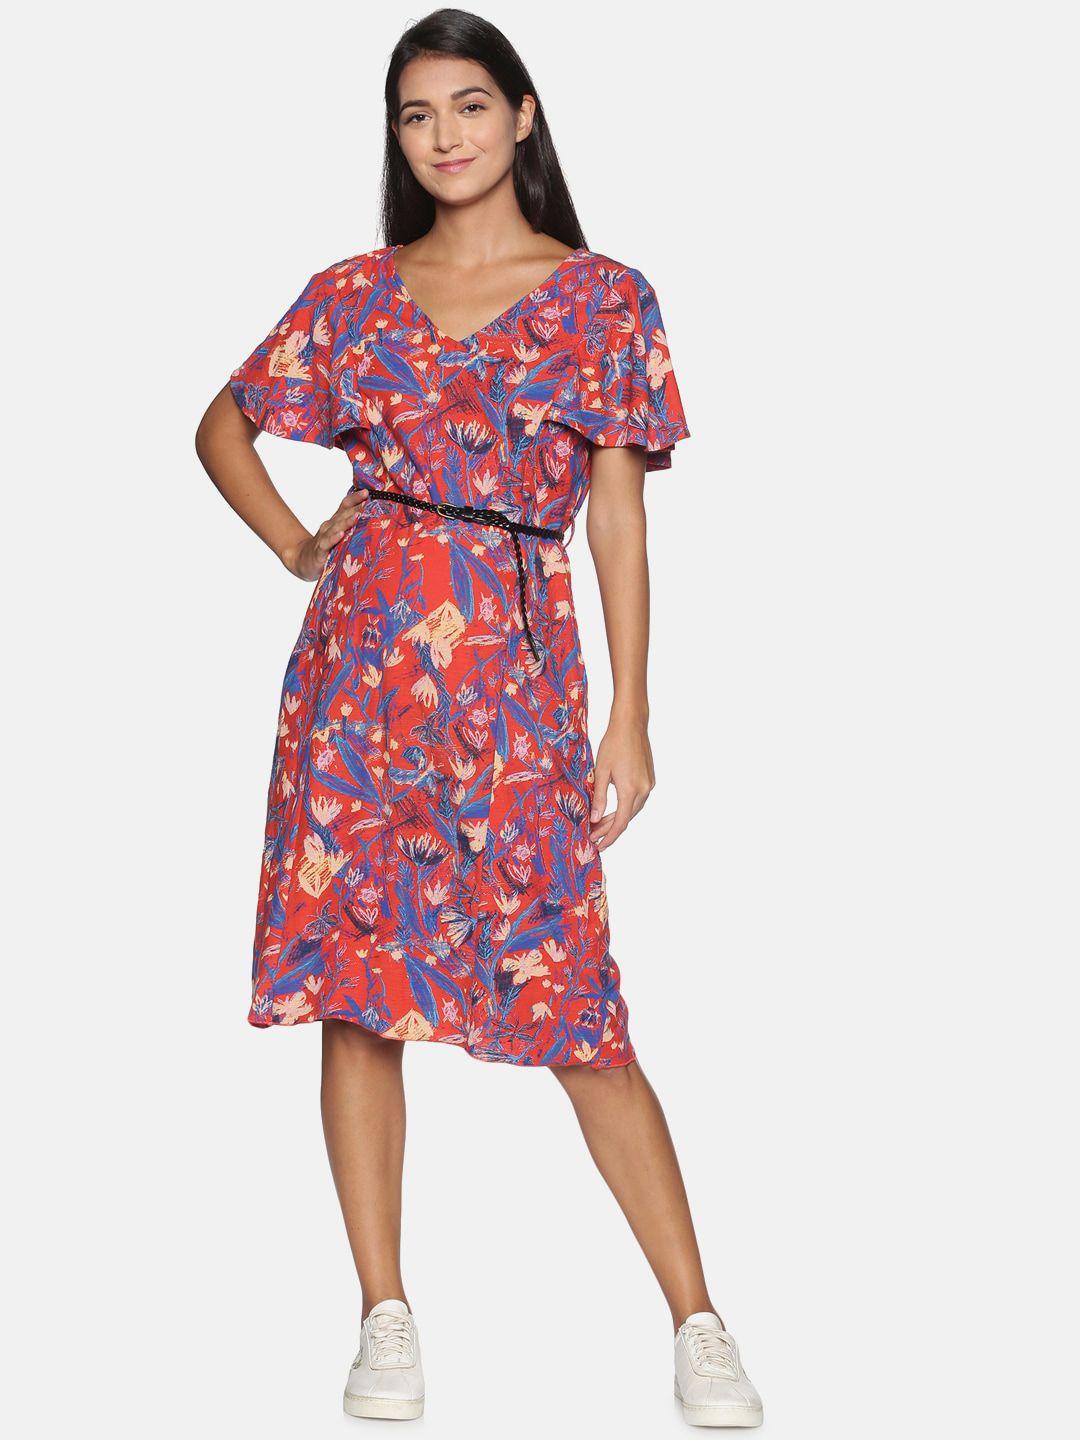 the mom store maternity red floral dress